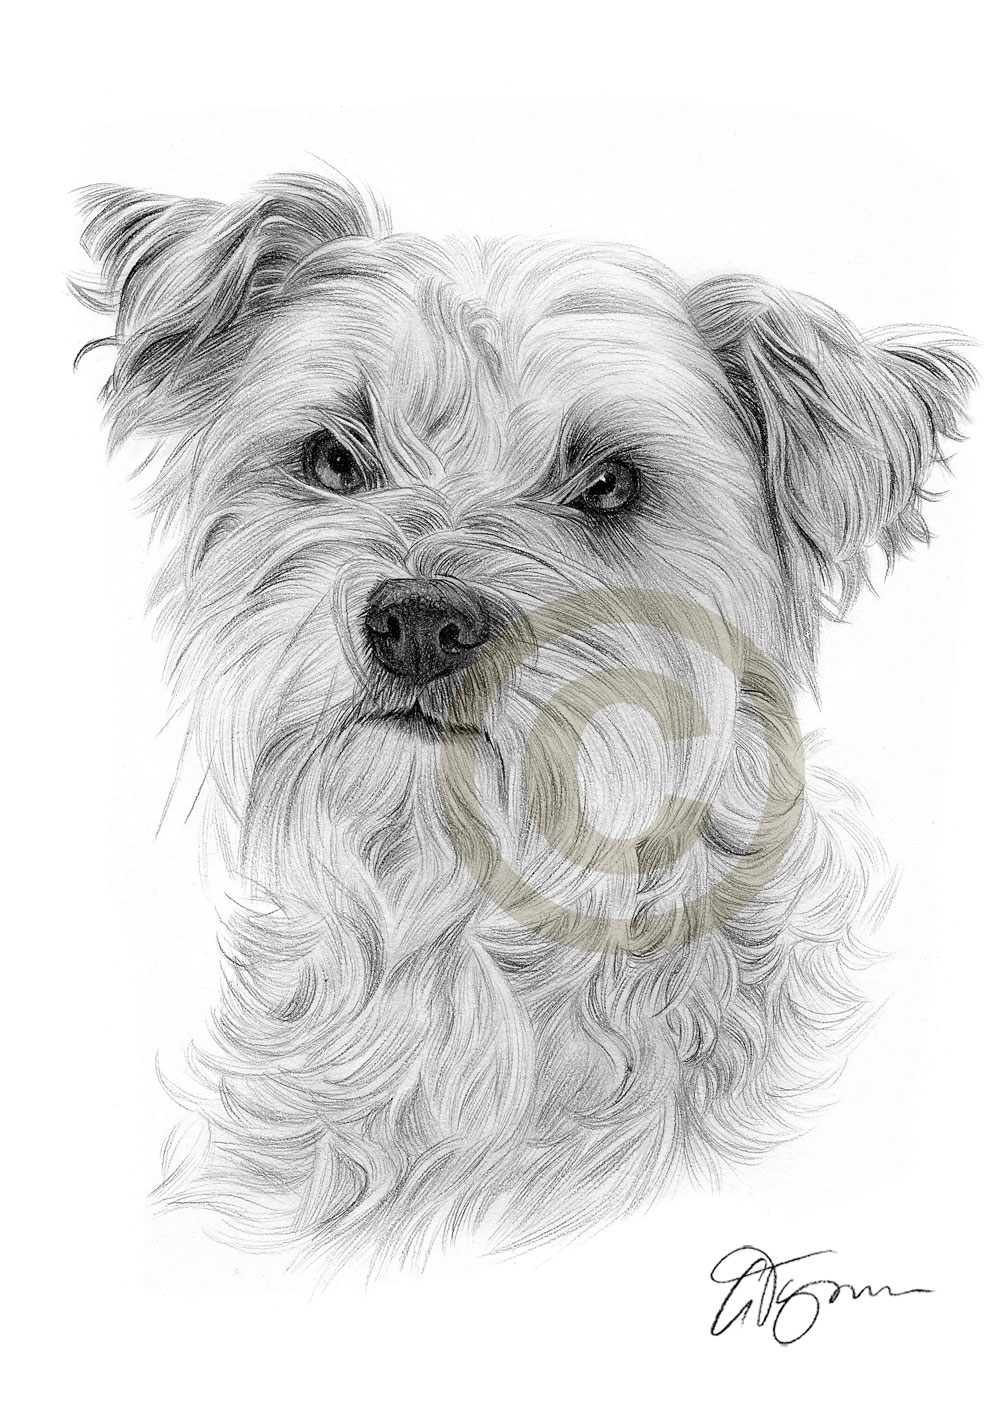 Cairn Terrier Sketch at PaintingValley.com | Explore collection of ...